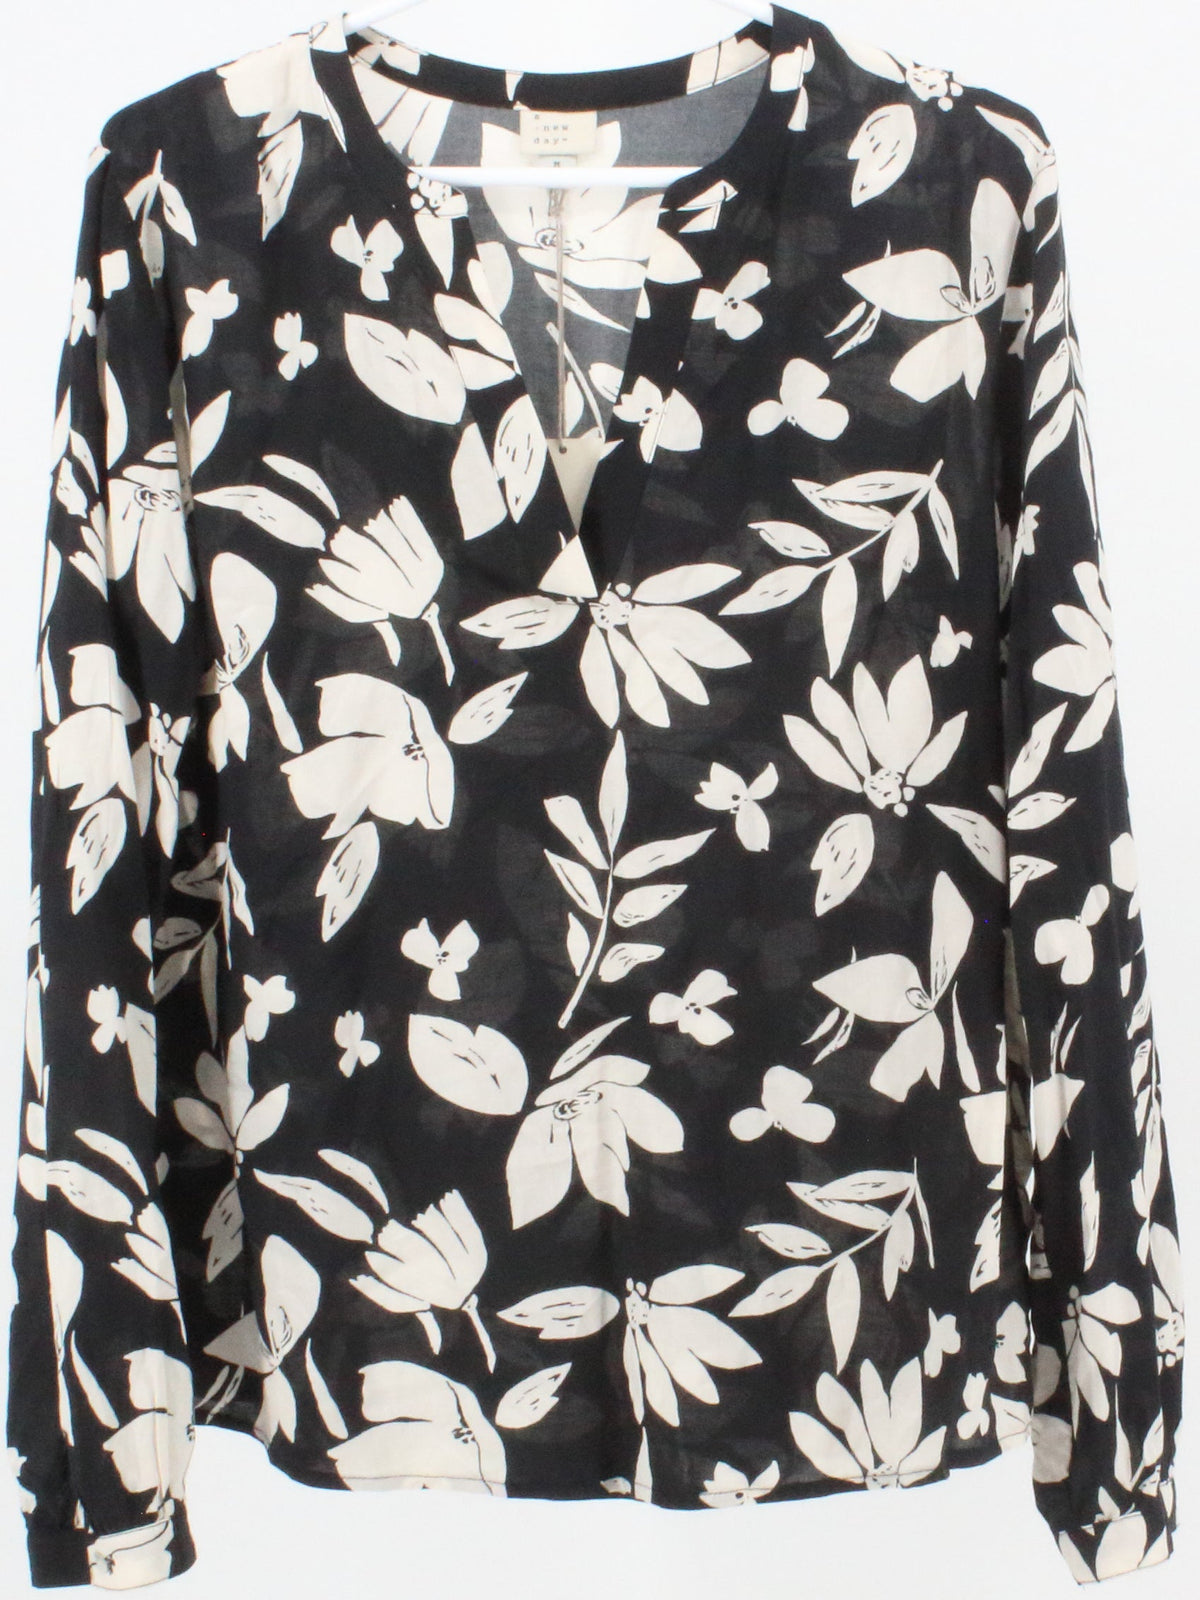 A New Day Black and White Flower Print Long Sleeve Top